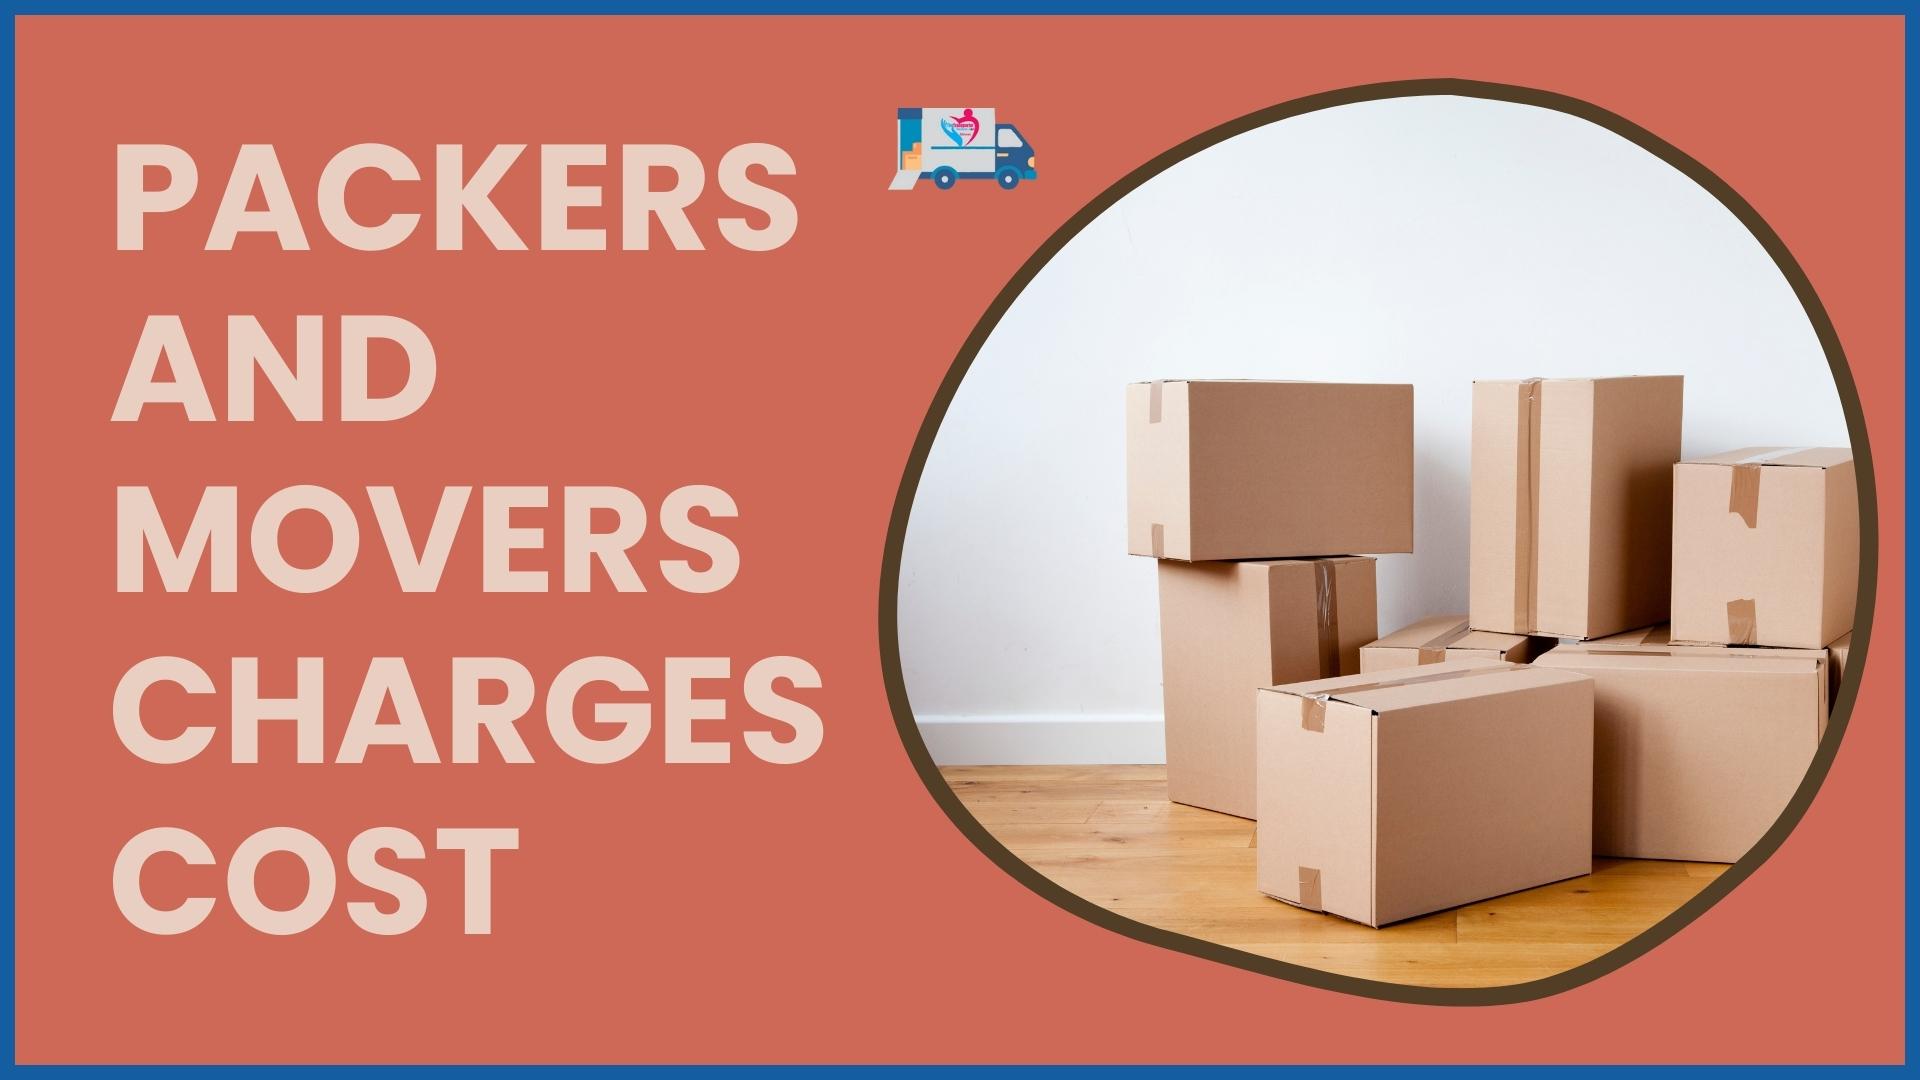 Packers and Movers offers competitive movers and packers Nagpur rates and excellent services